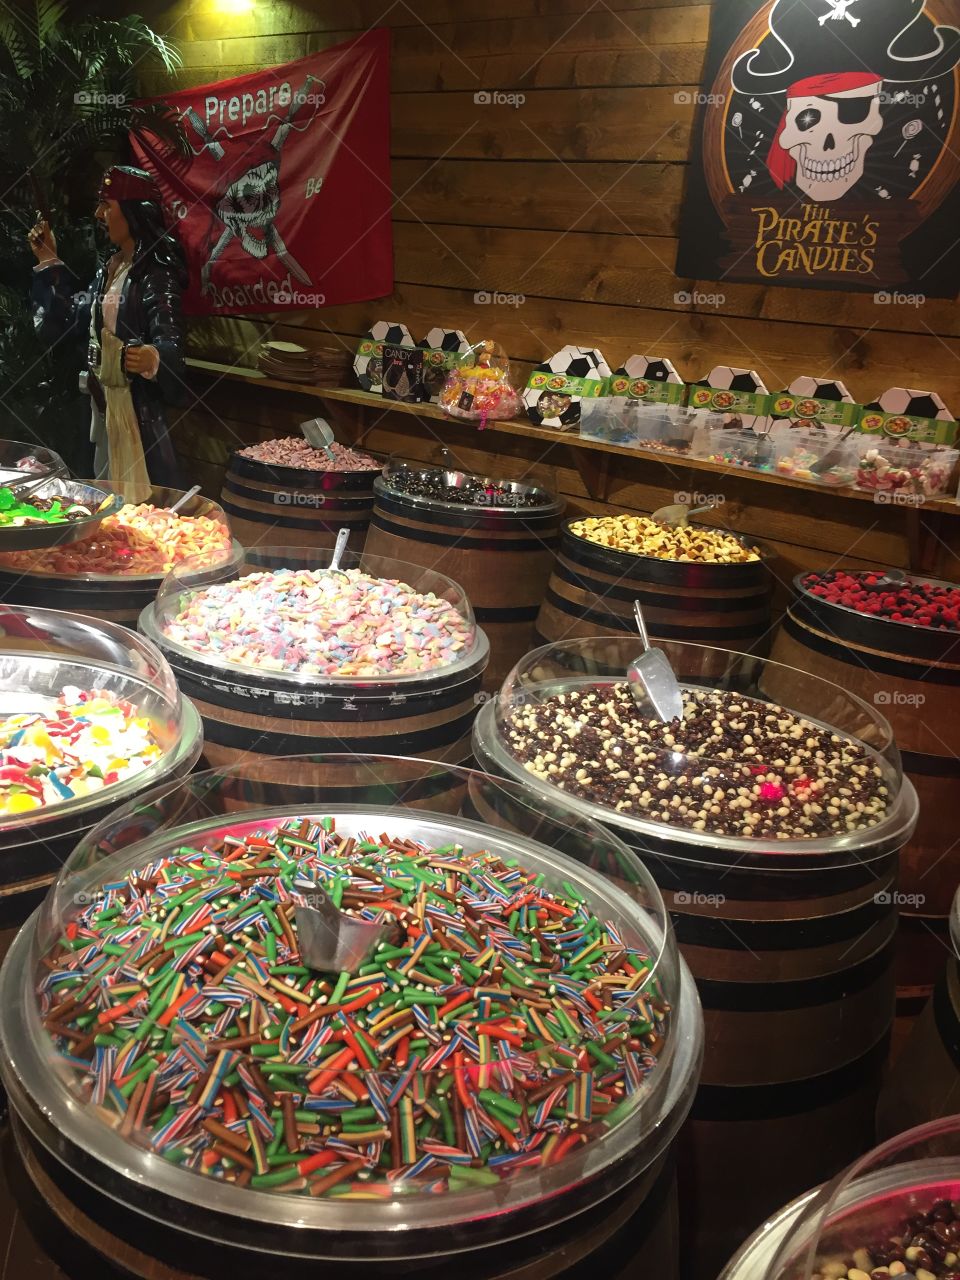 The pirate's Candies